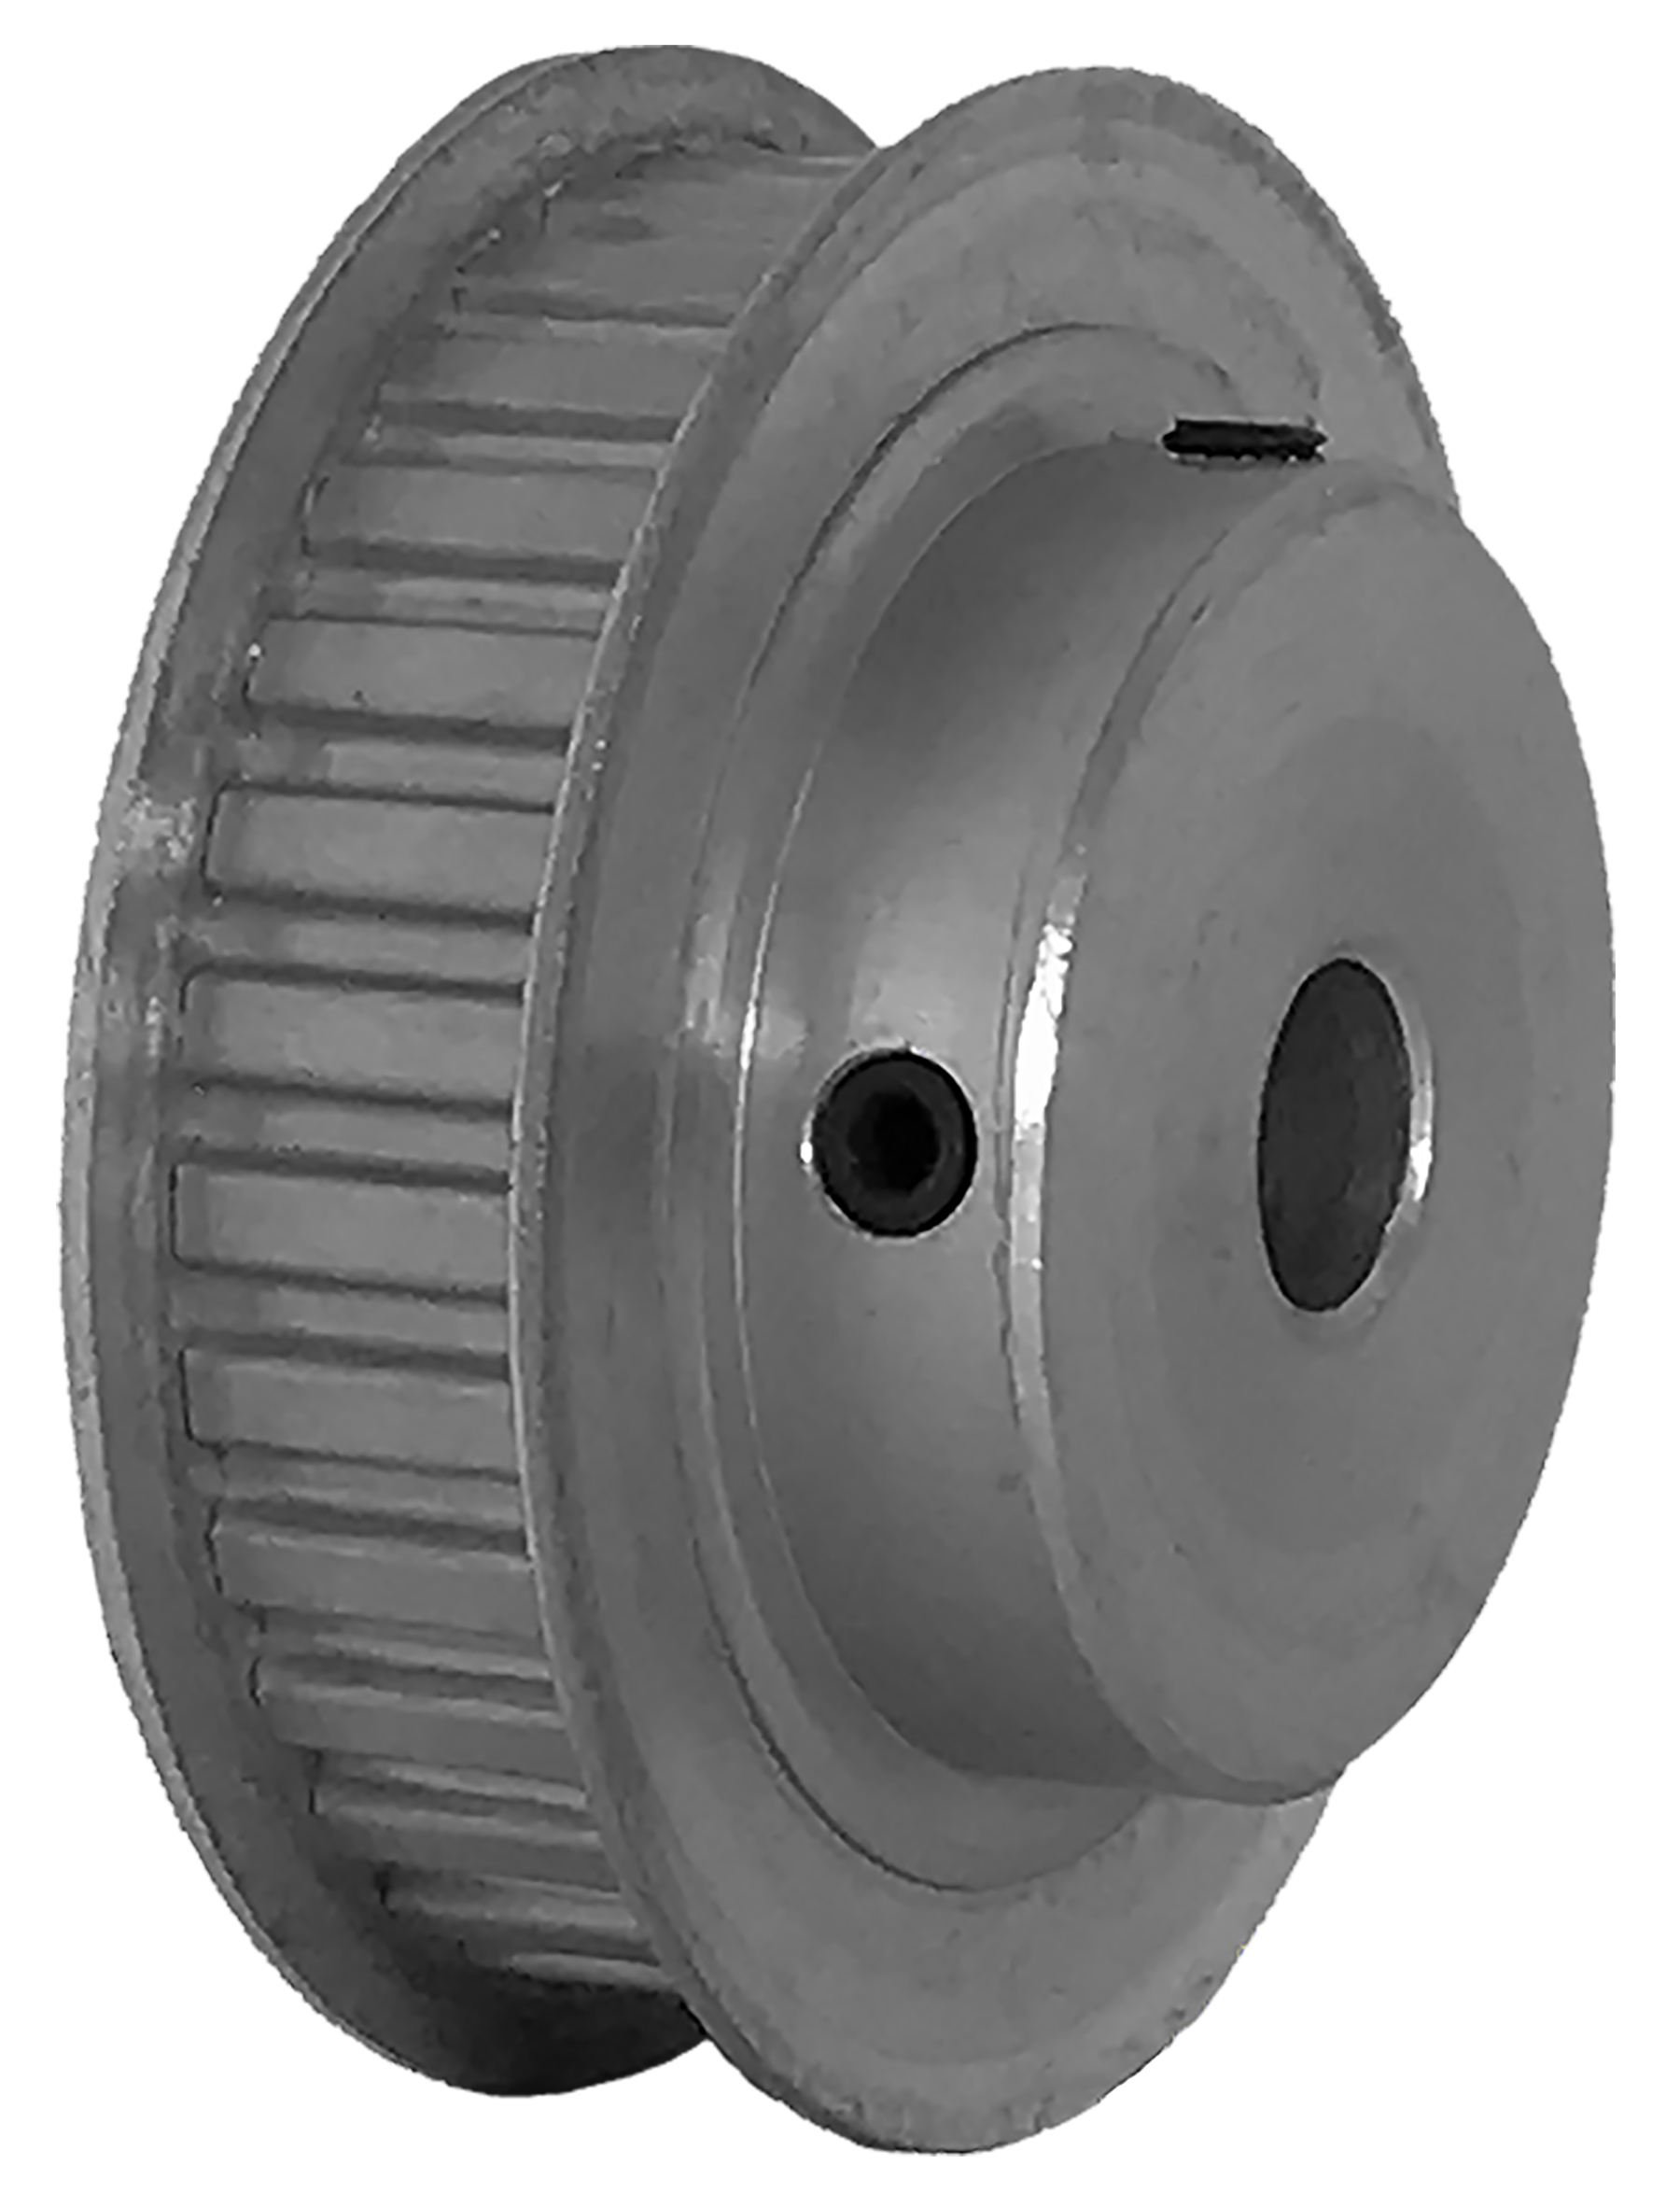 32XL037-6FA5 - Aluminum Imperial Pitch Pulleys